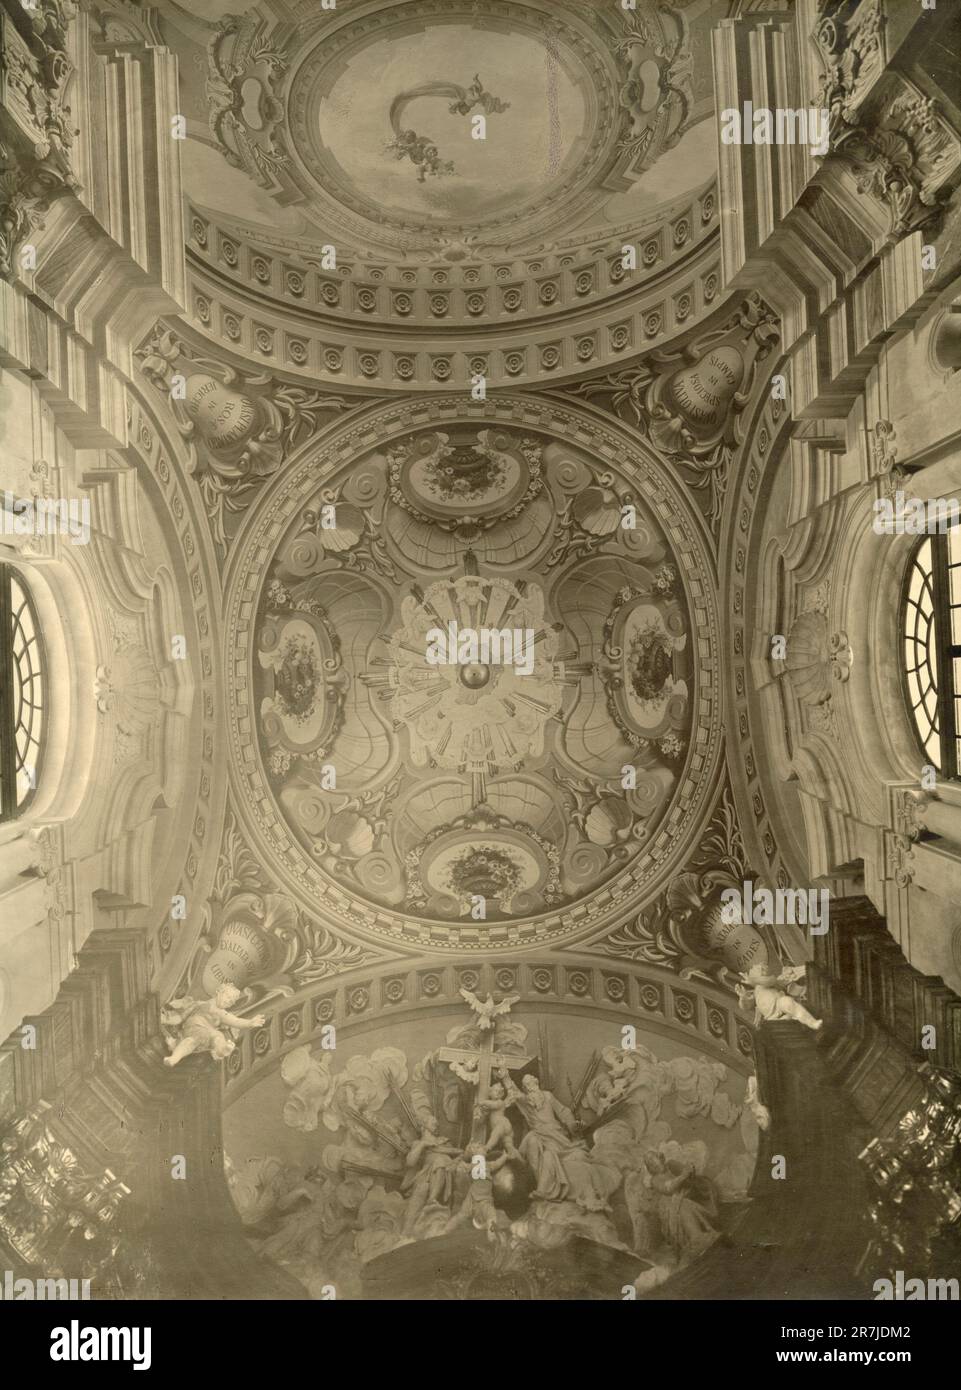 Ancient frescoed Baroc church ceiling with stucco and Latin inscriptions, 1900s Stock Photo